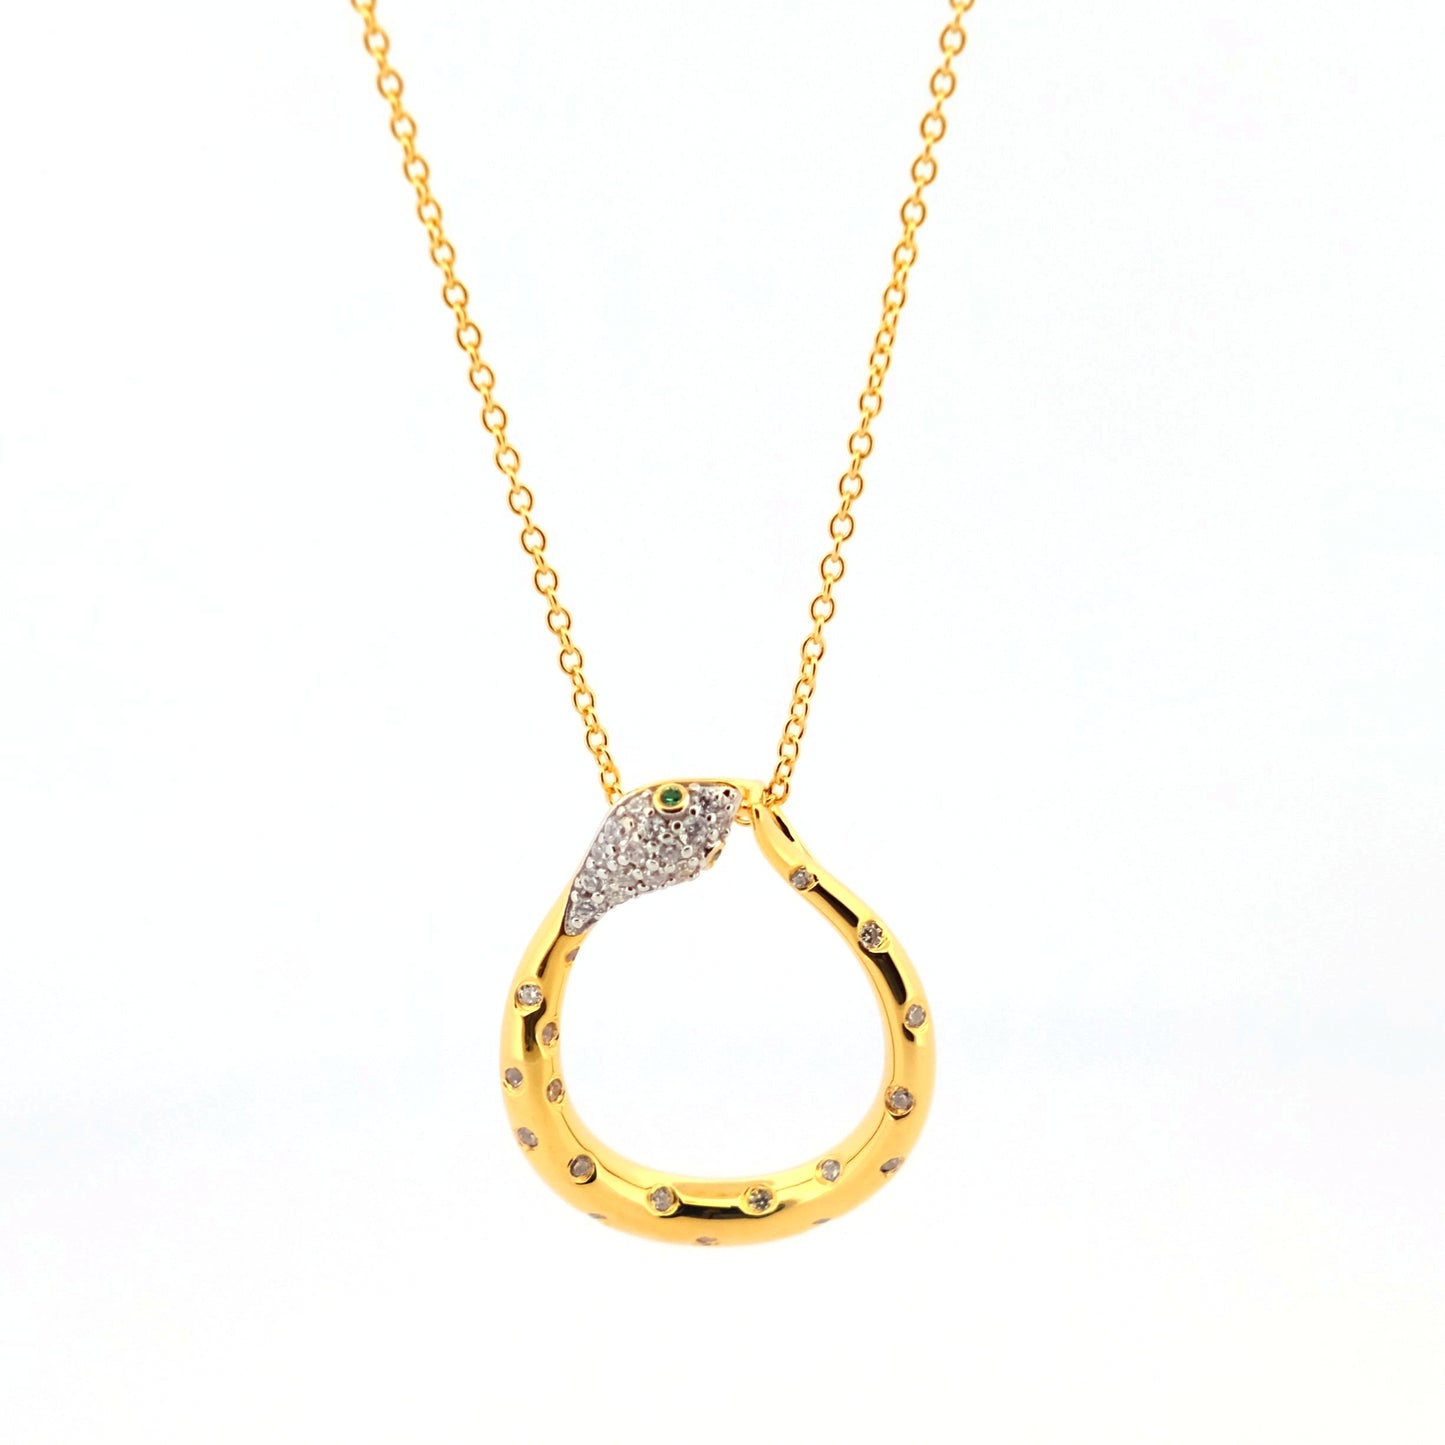 Snake Necklace | Marcello Pane | Luby 